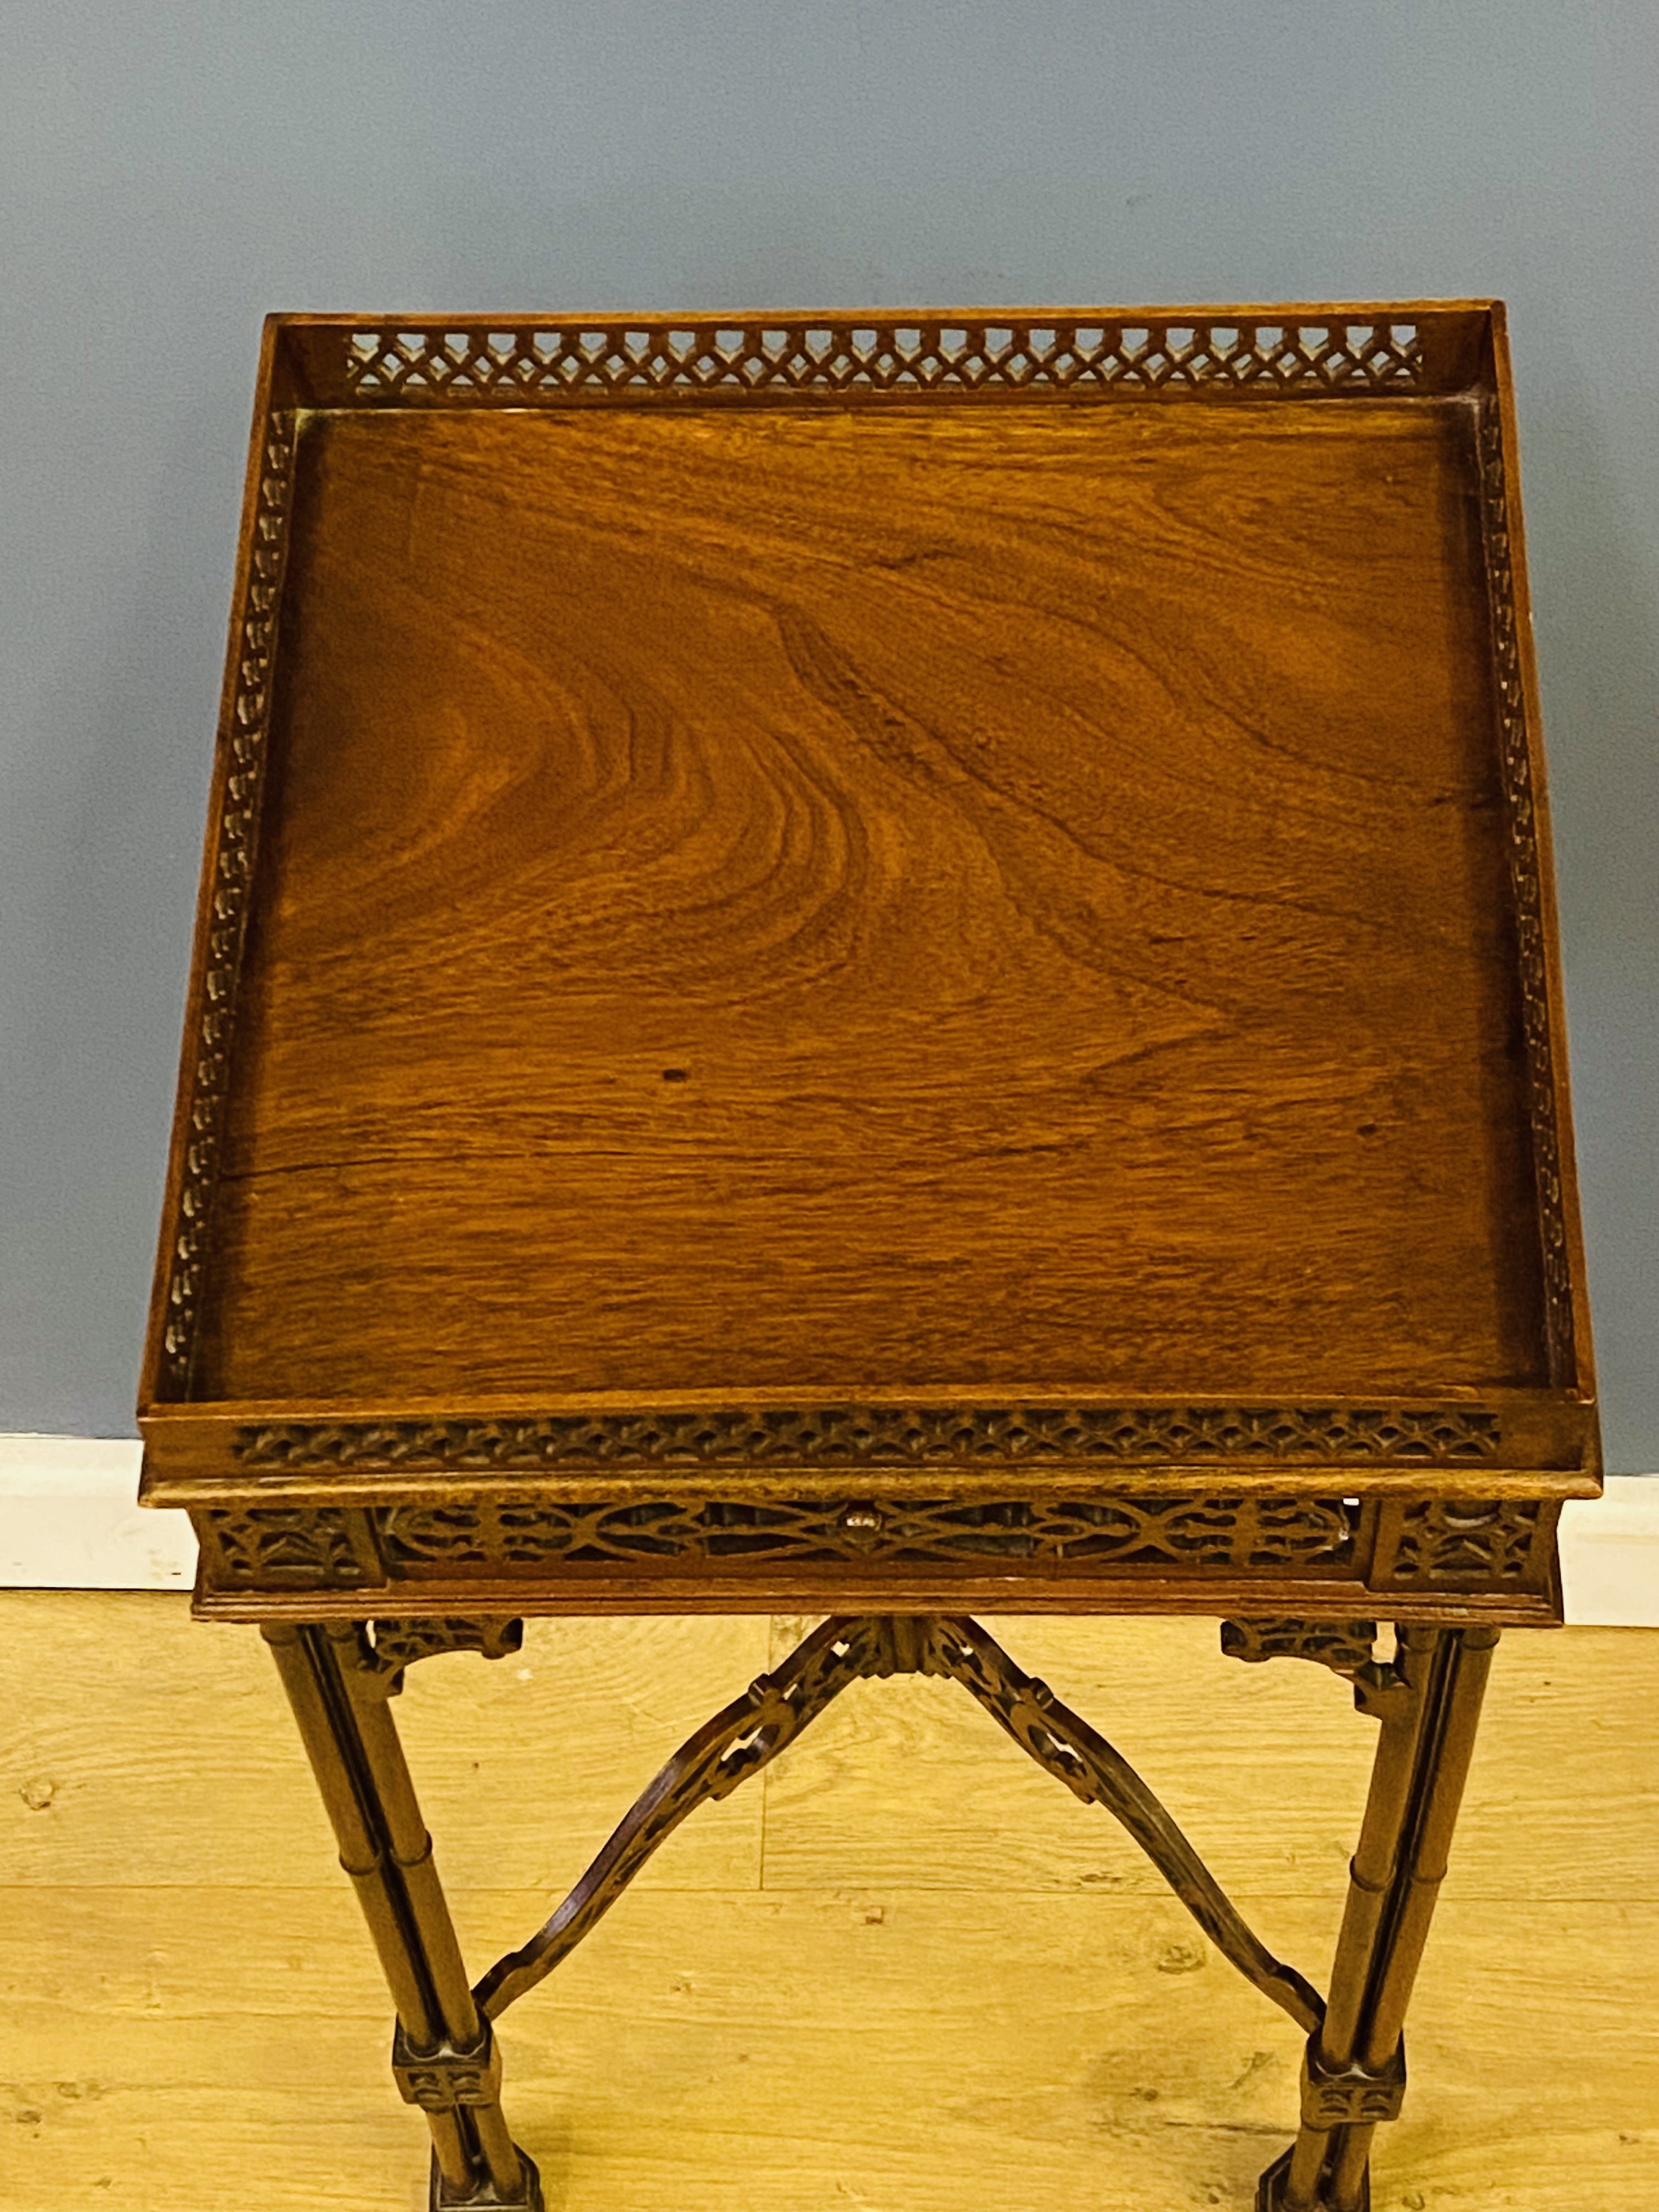 Reproduction Chippendale style mahogany urn stand - Image 6 of 6